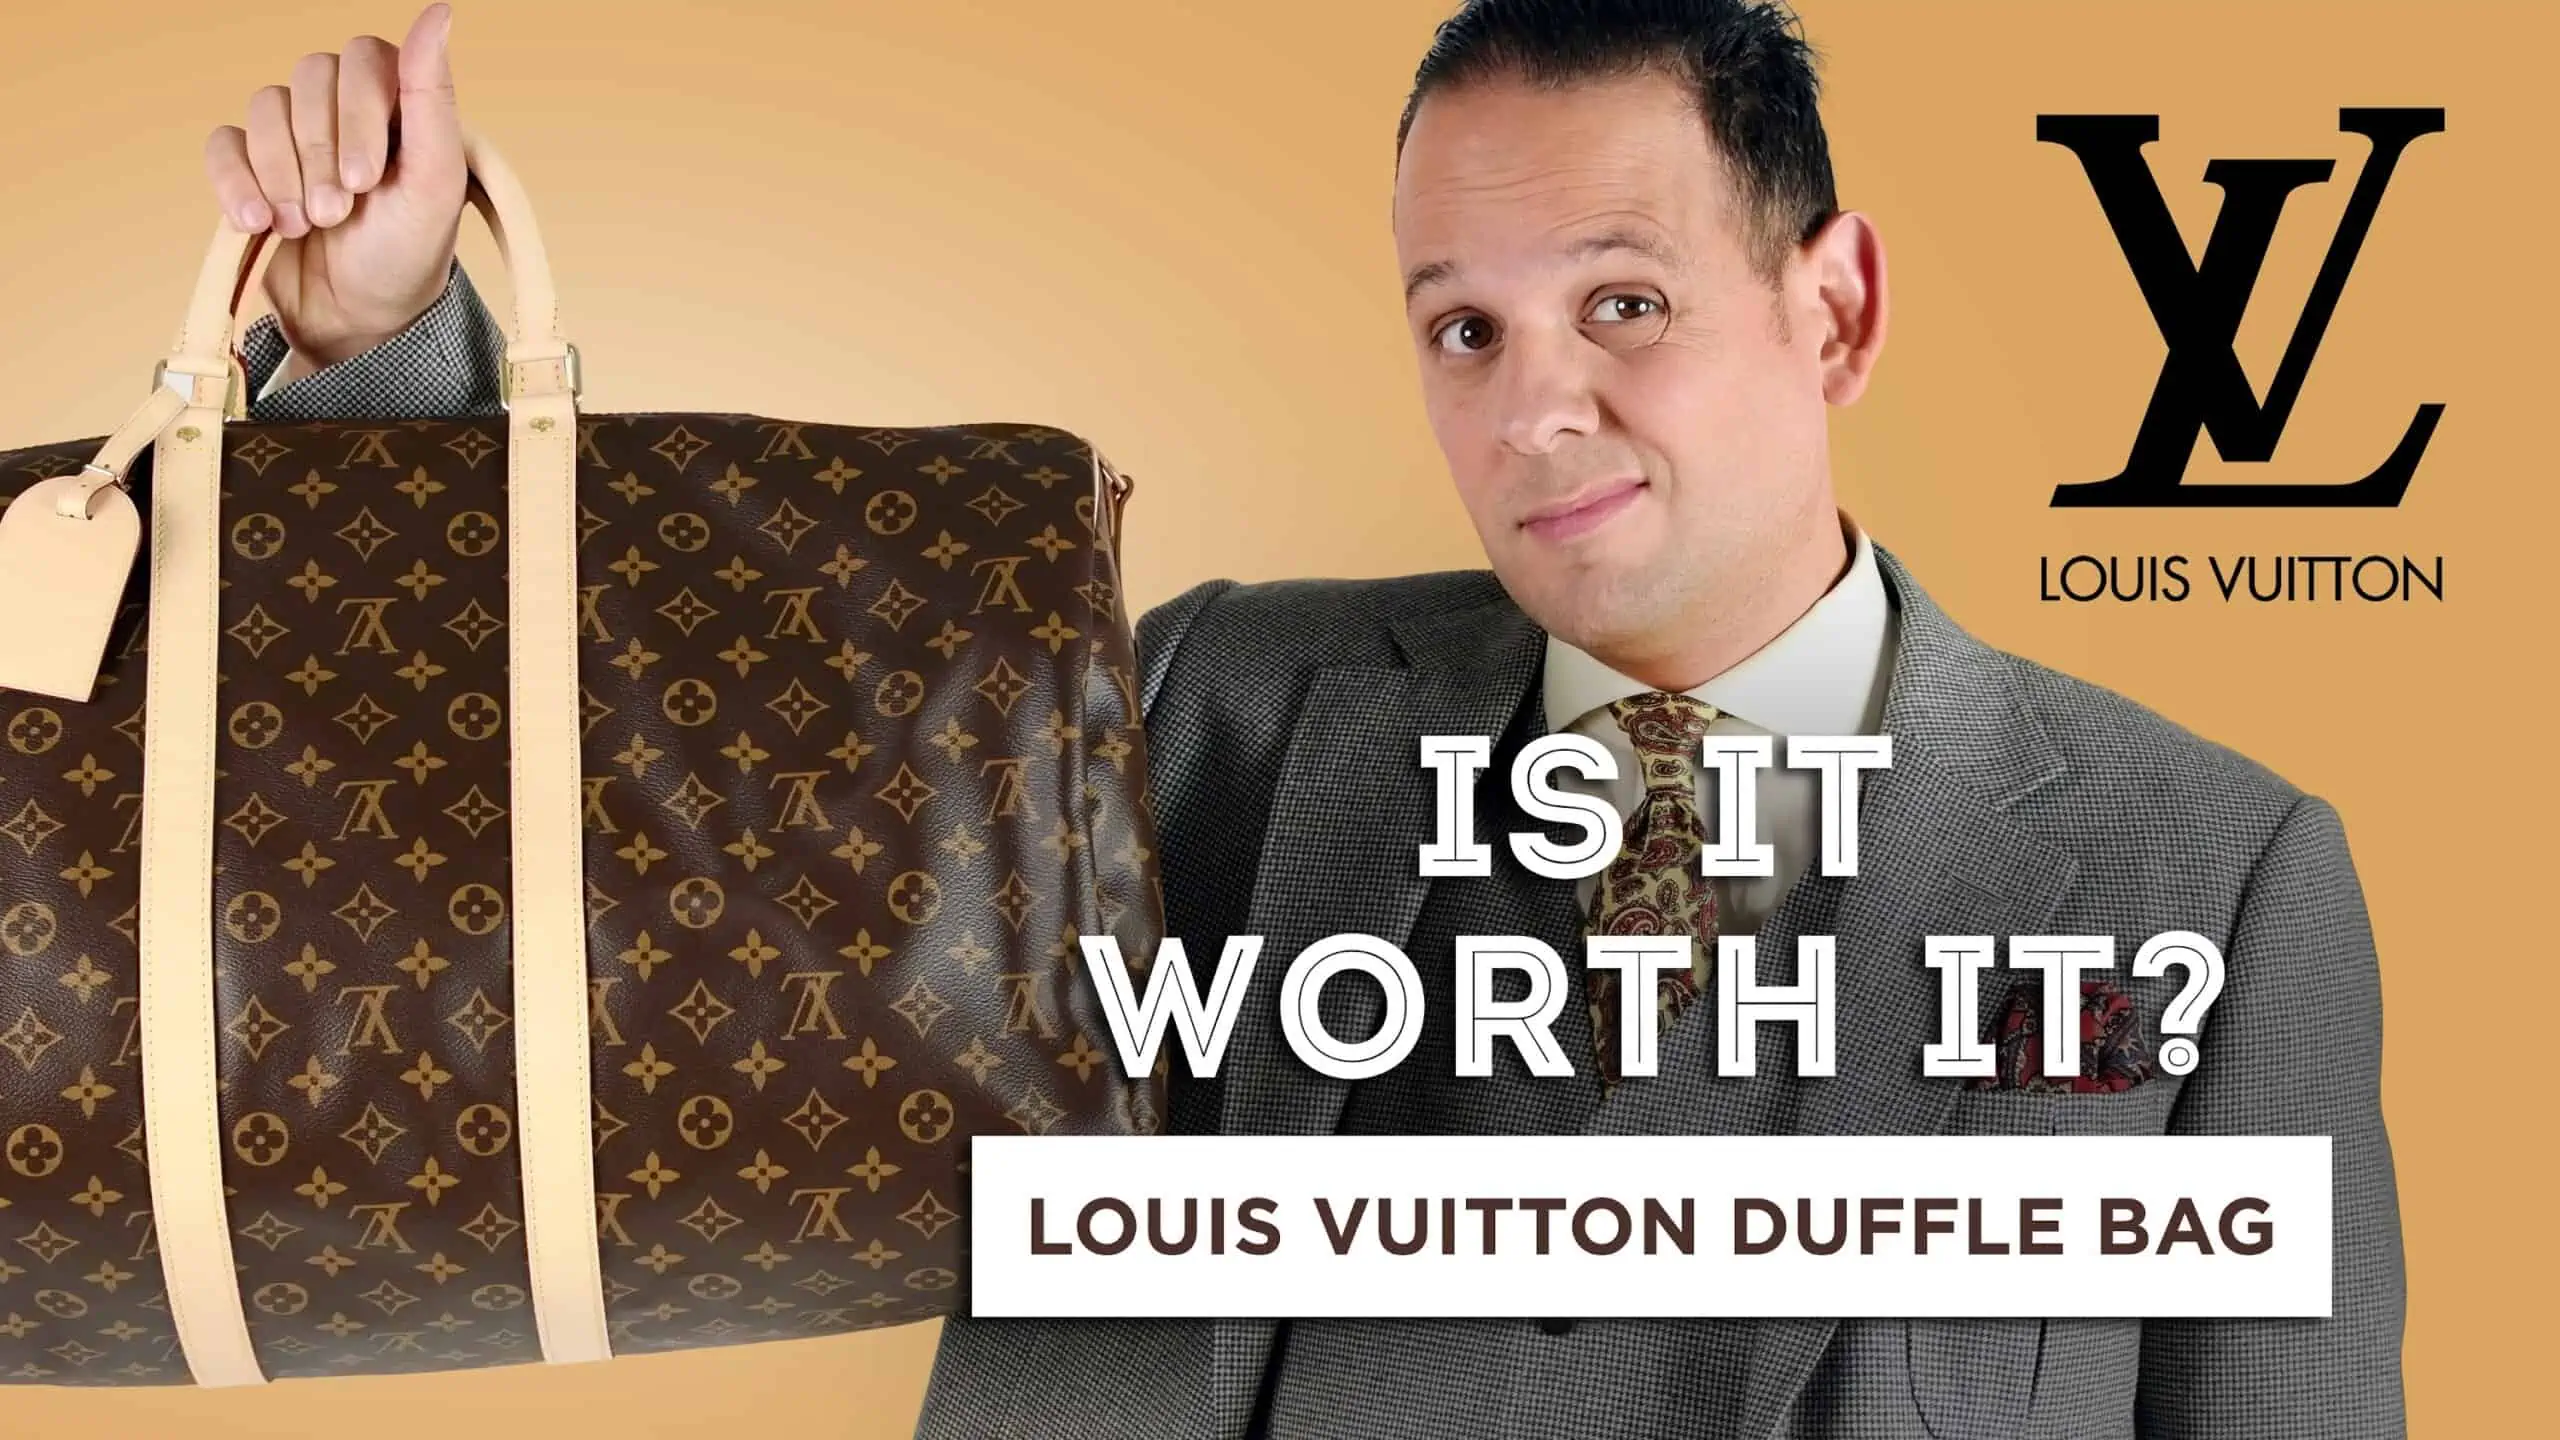 louis vuitton luggage carry on size